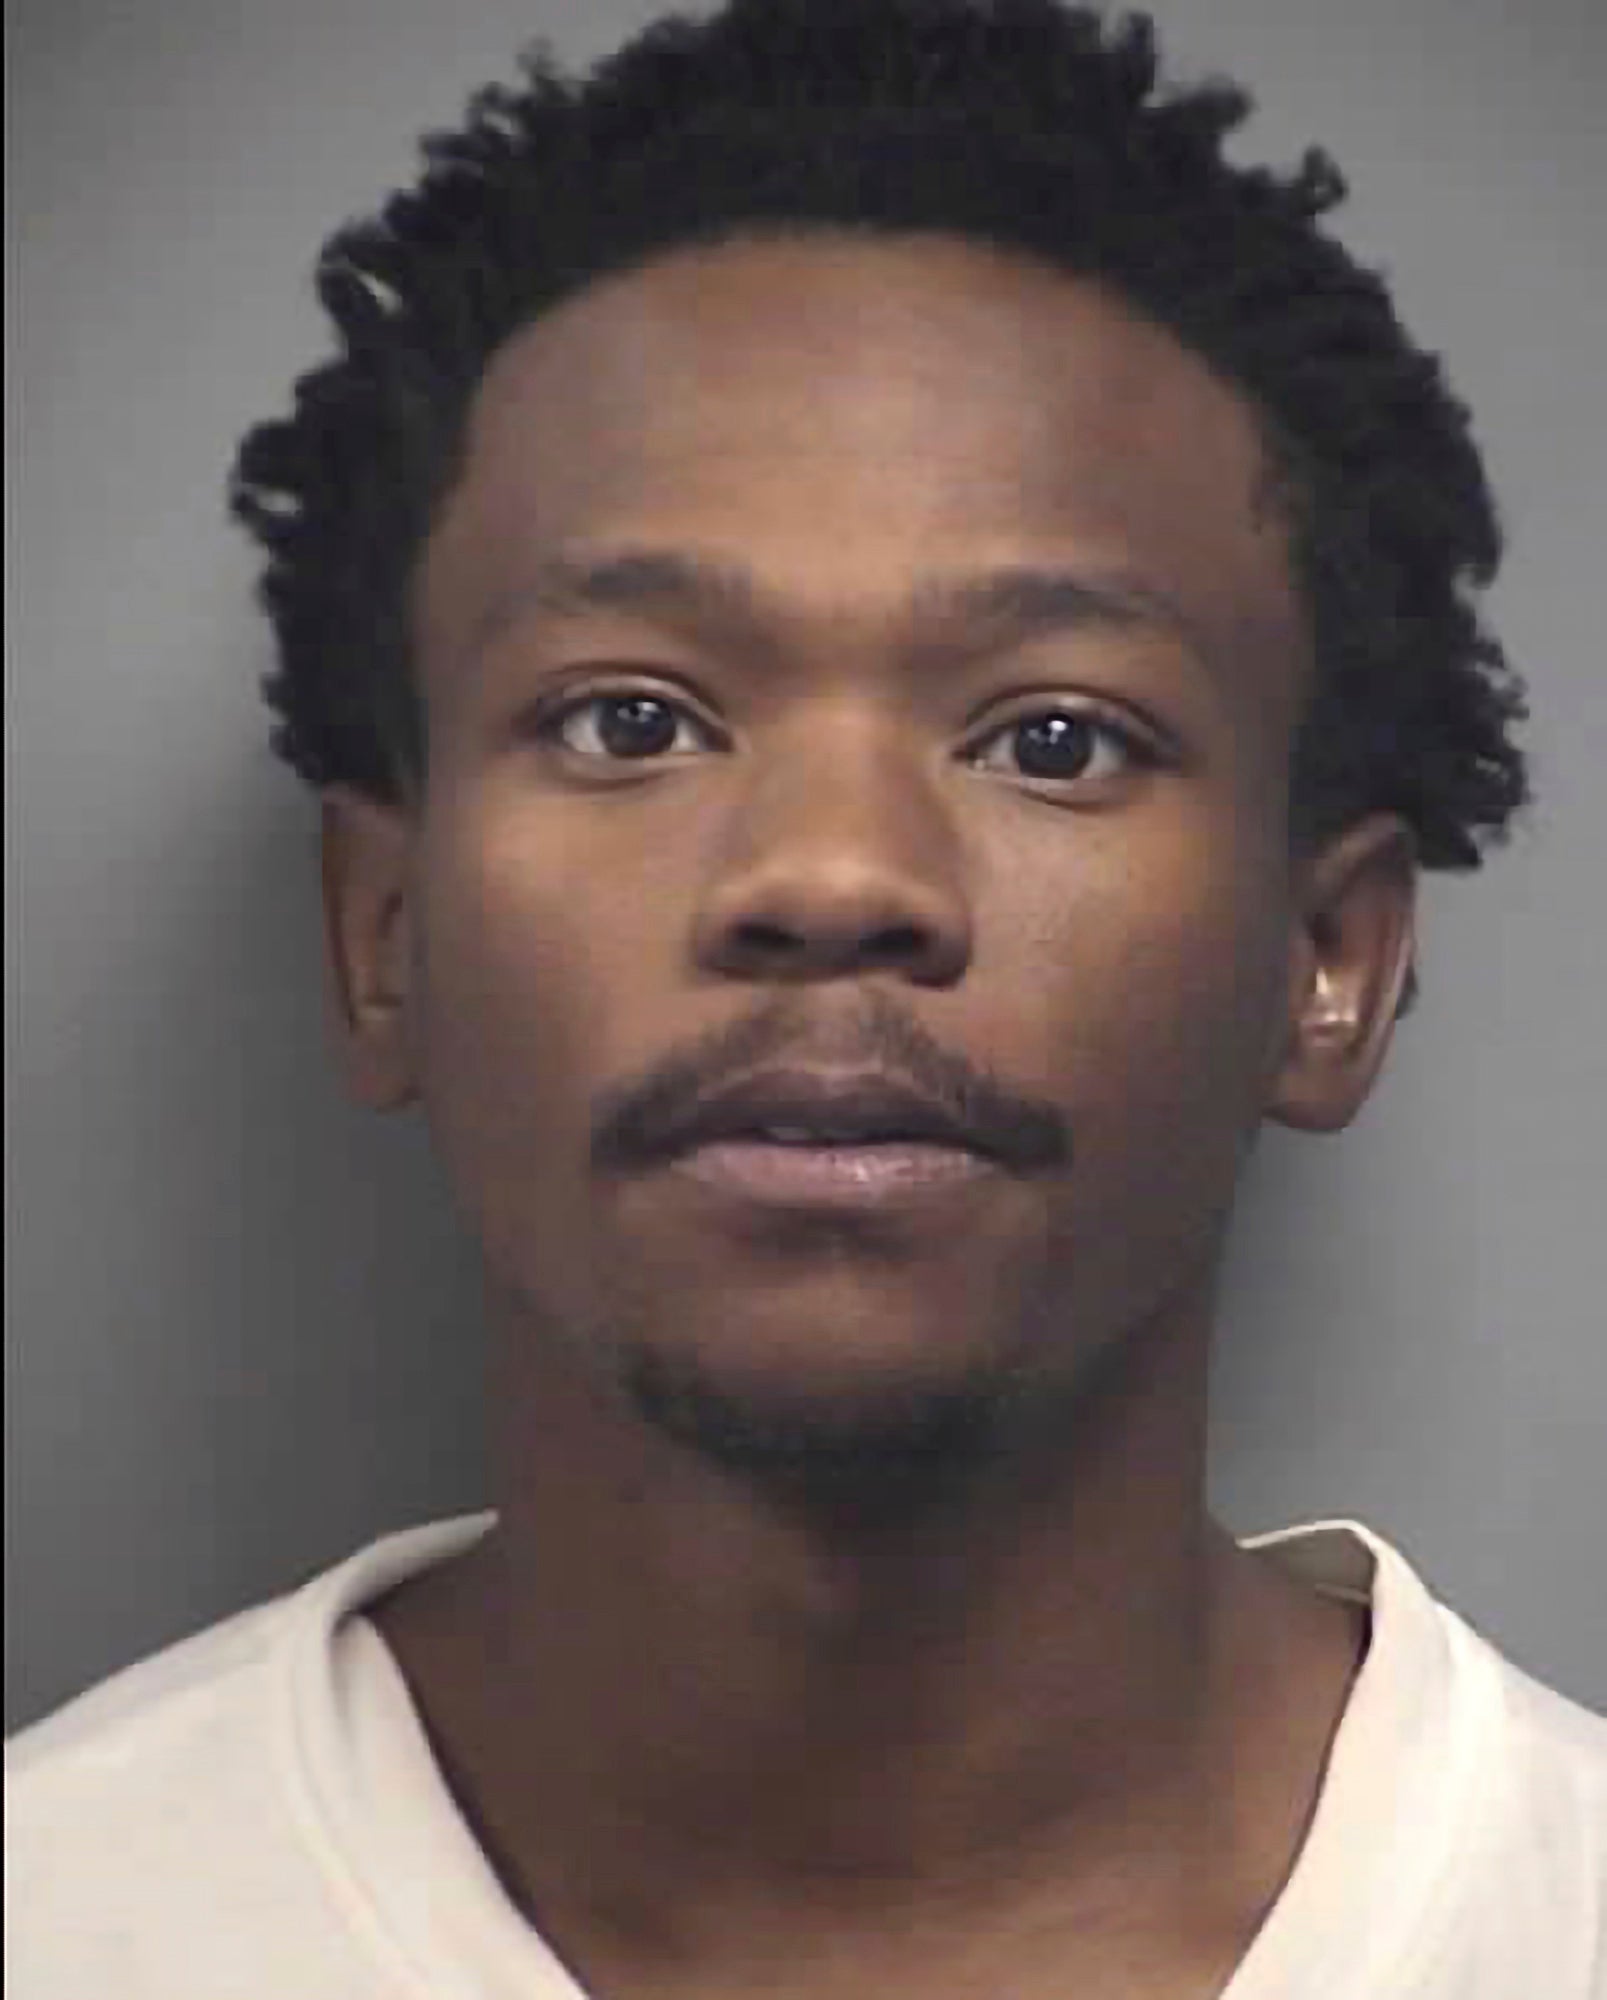 This North Las Vegas Community Correctional Center booking photo provided by North Las Vegas Police Department shows Na'Onche Tamar Osborne, 21, following his arrest Thursday, Oct. 20, 2022